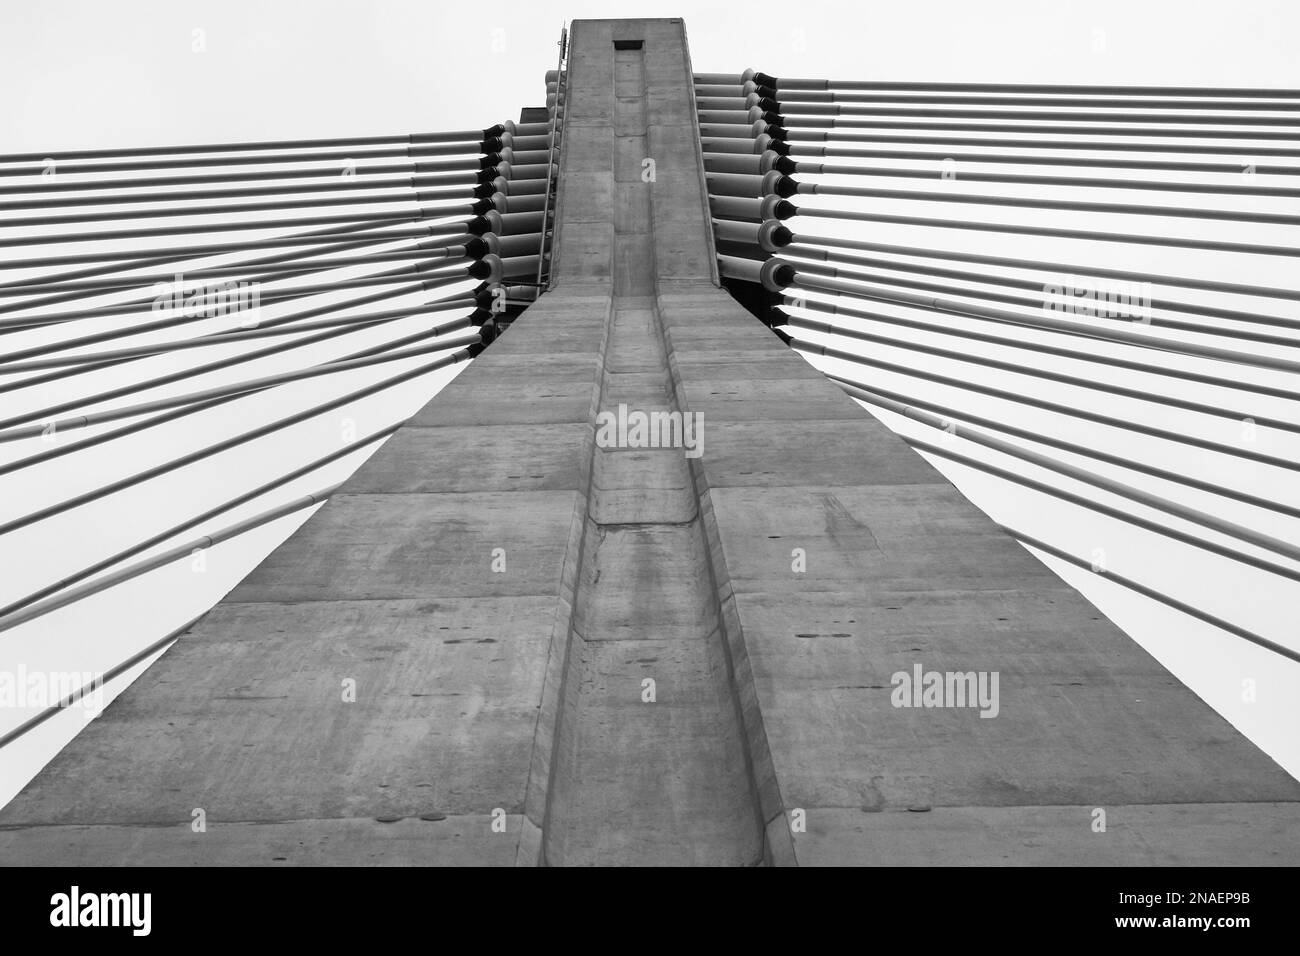 Concrete ylon with attached tie rods of cable-stayed bridge Stock Photo